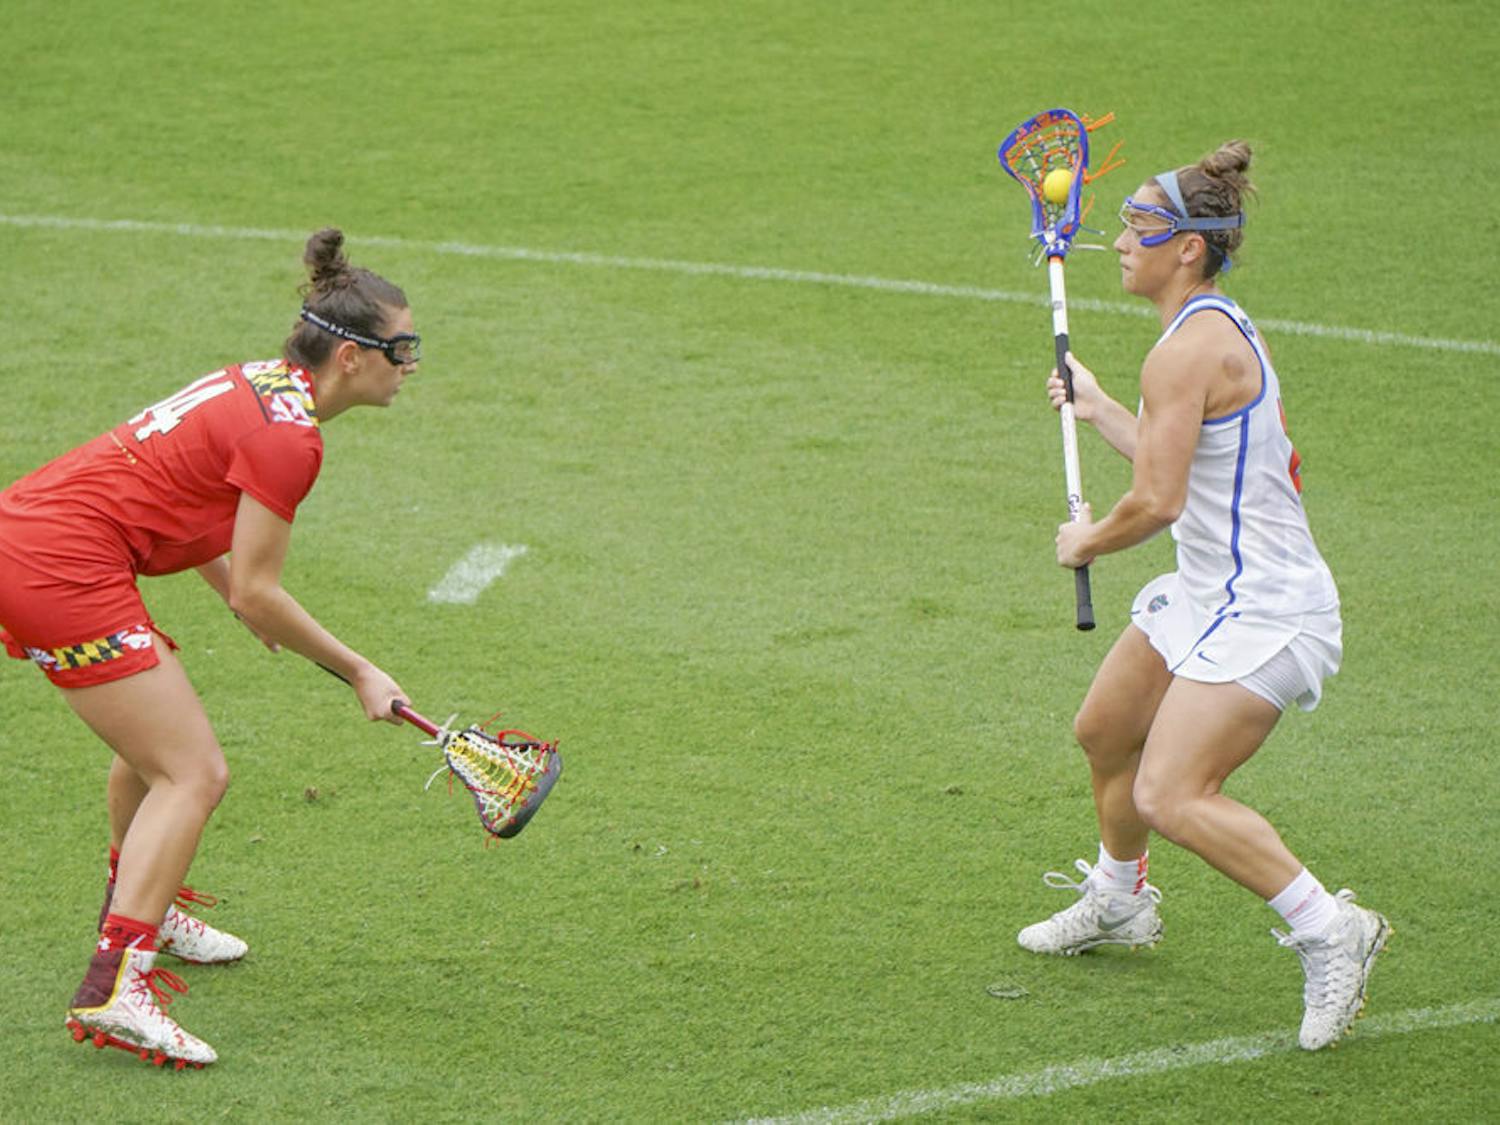 Sammi Burgess makes a play on the ball during Florida's 14-4 loss on March 19, 2016 Maryland at Donald R. Dizney Stadium.&nbsp;